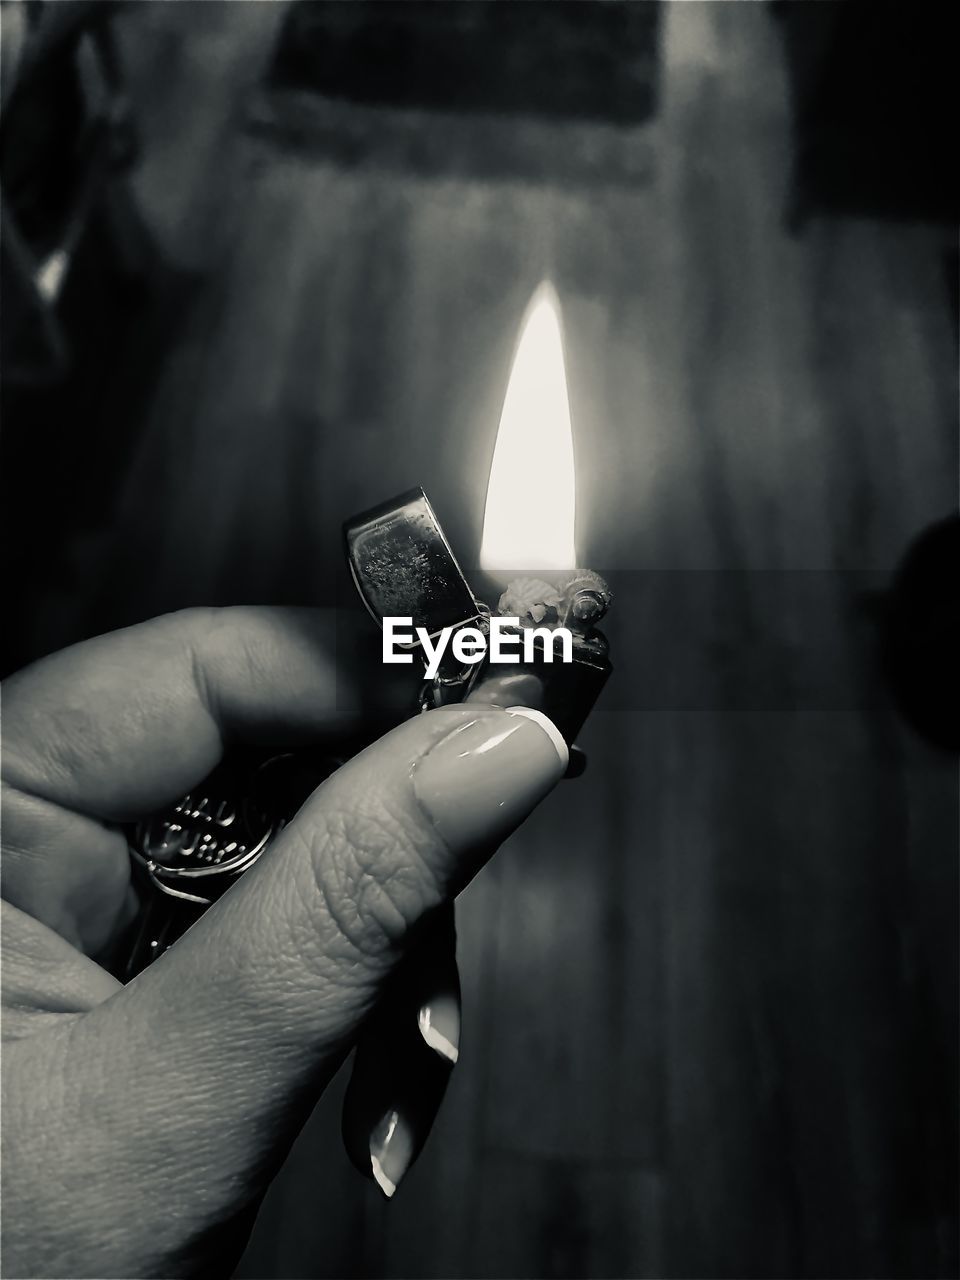 black, hand, darkness, burning, fire, black and white, white, flame, holding, monochrome, one person, monochrome photography, finger, light, close-up, focus on foreground, igniting, indoors, adult, heat, cigarette lighter, candle, personal perspective, lifestyles